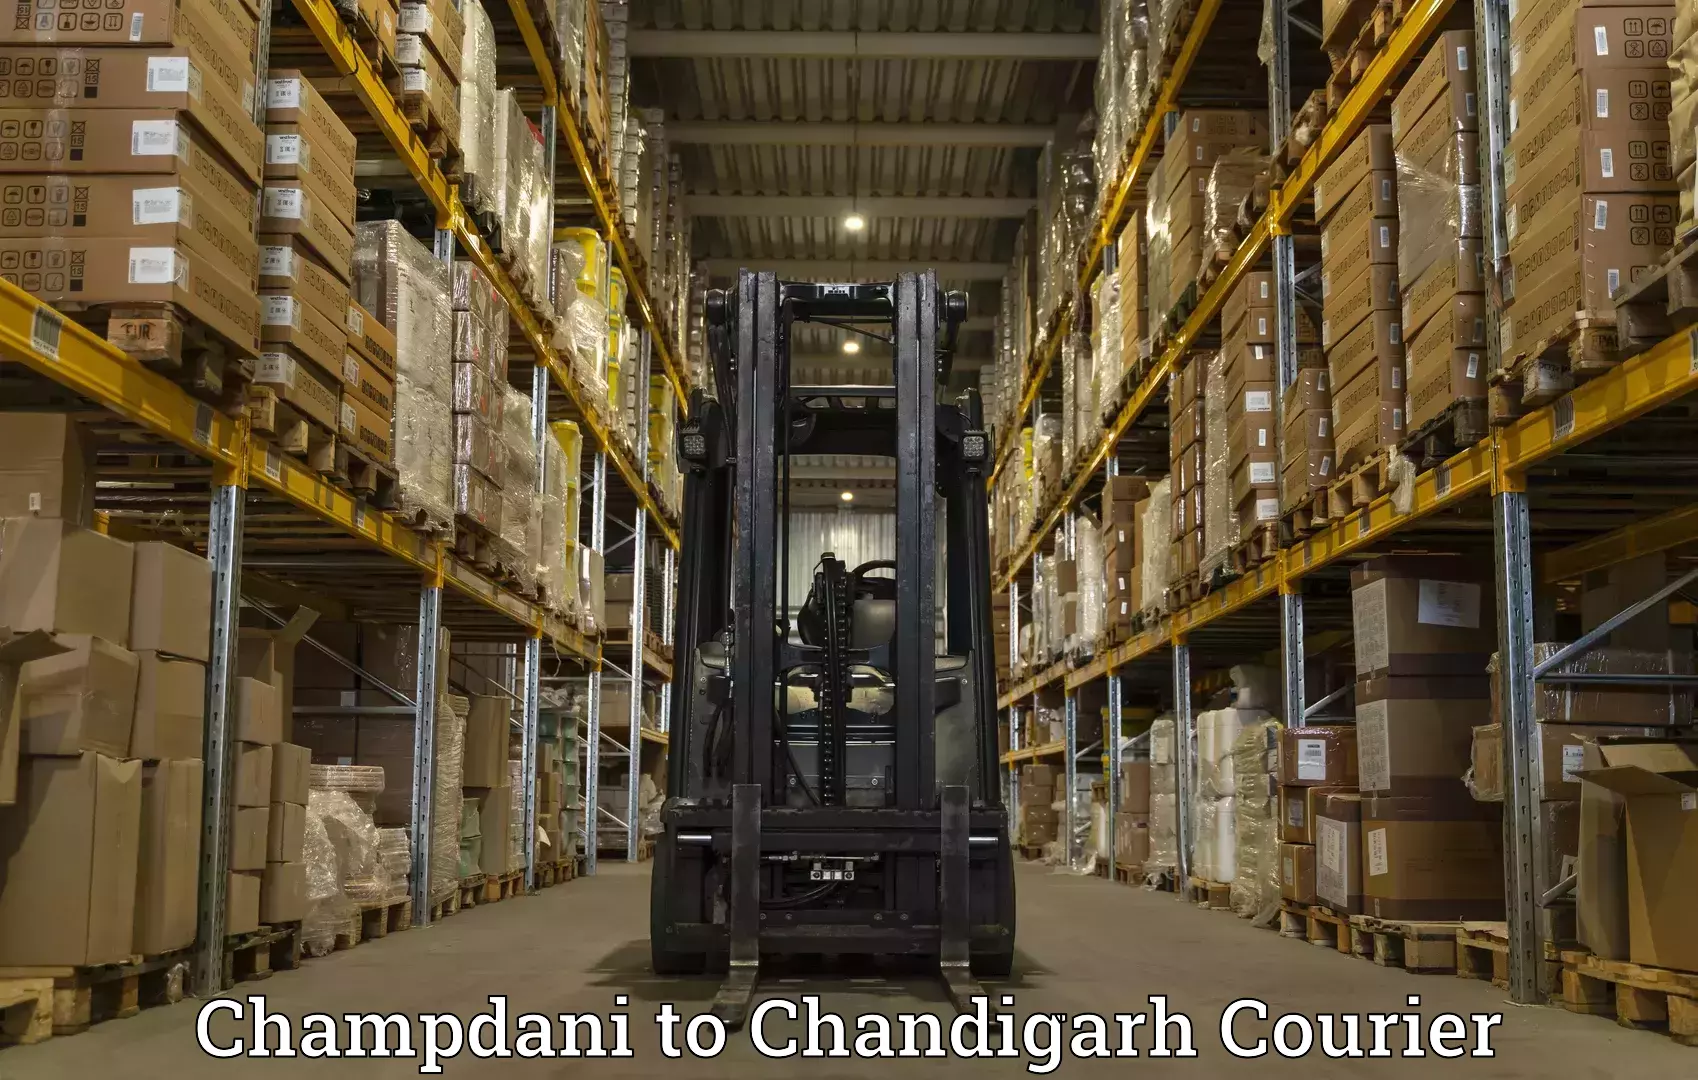 Express courier capabilities Champdani to Chandigarh